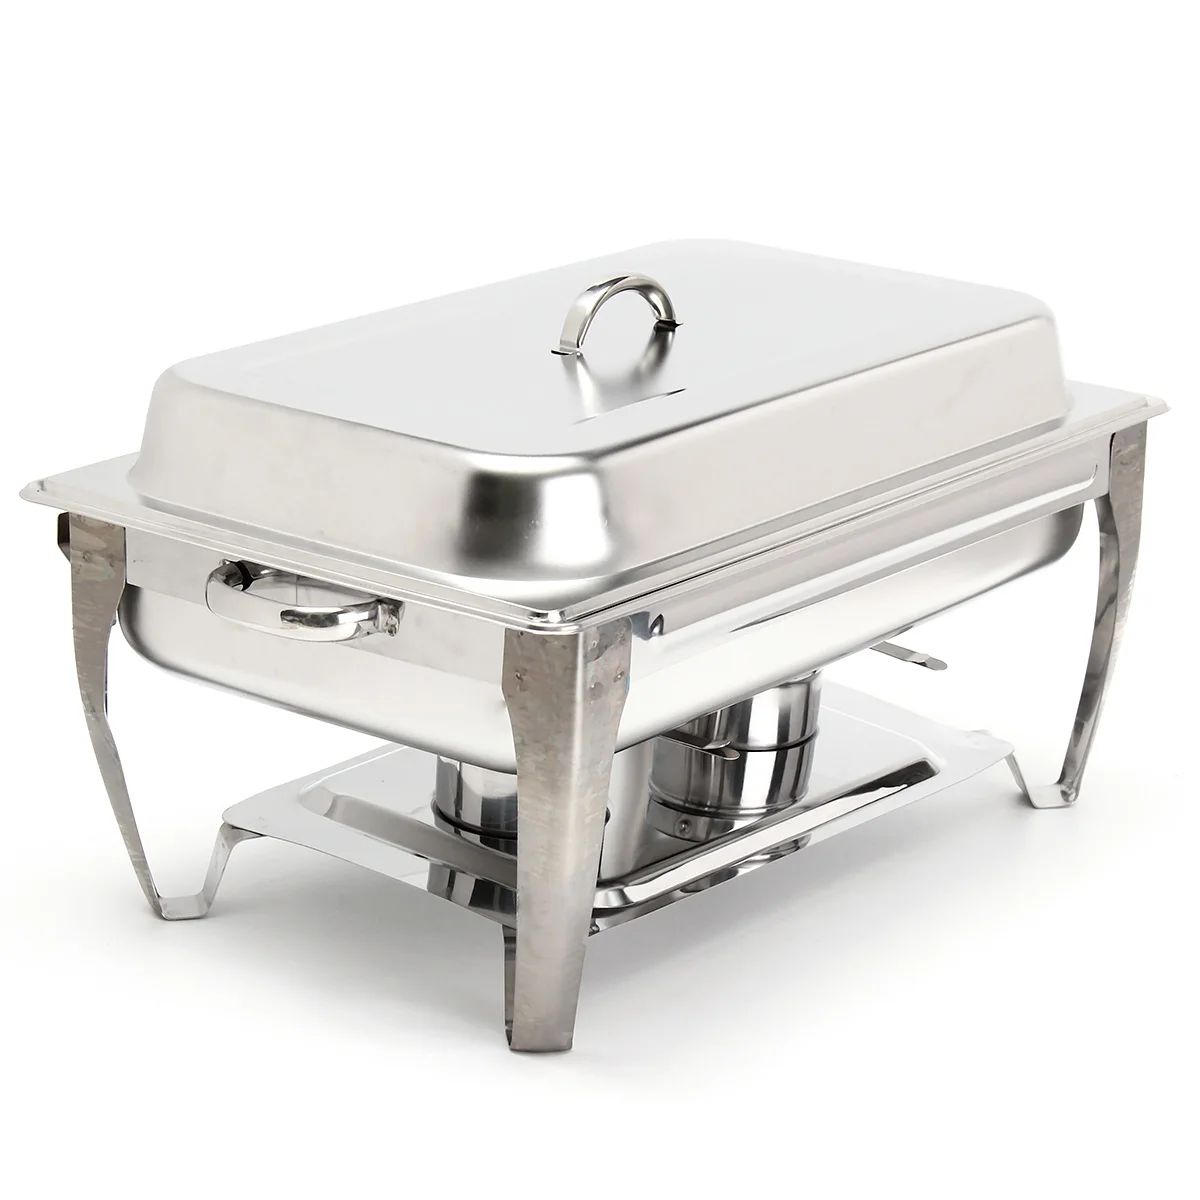 

9L Foldable Stainless Steel Square Buffet Stove Dish Set Container Food Warmer Rectangular Chafing Dish Full Buffet Catering